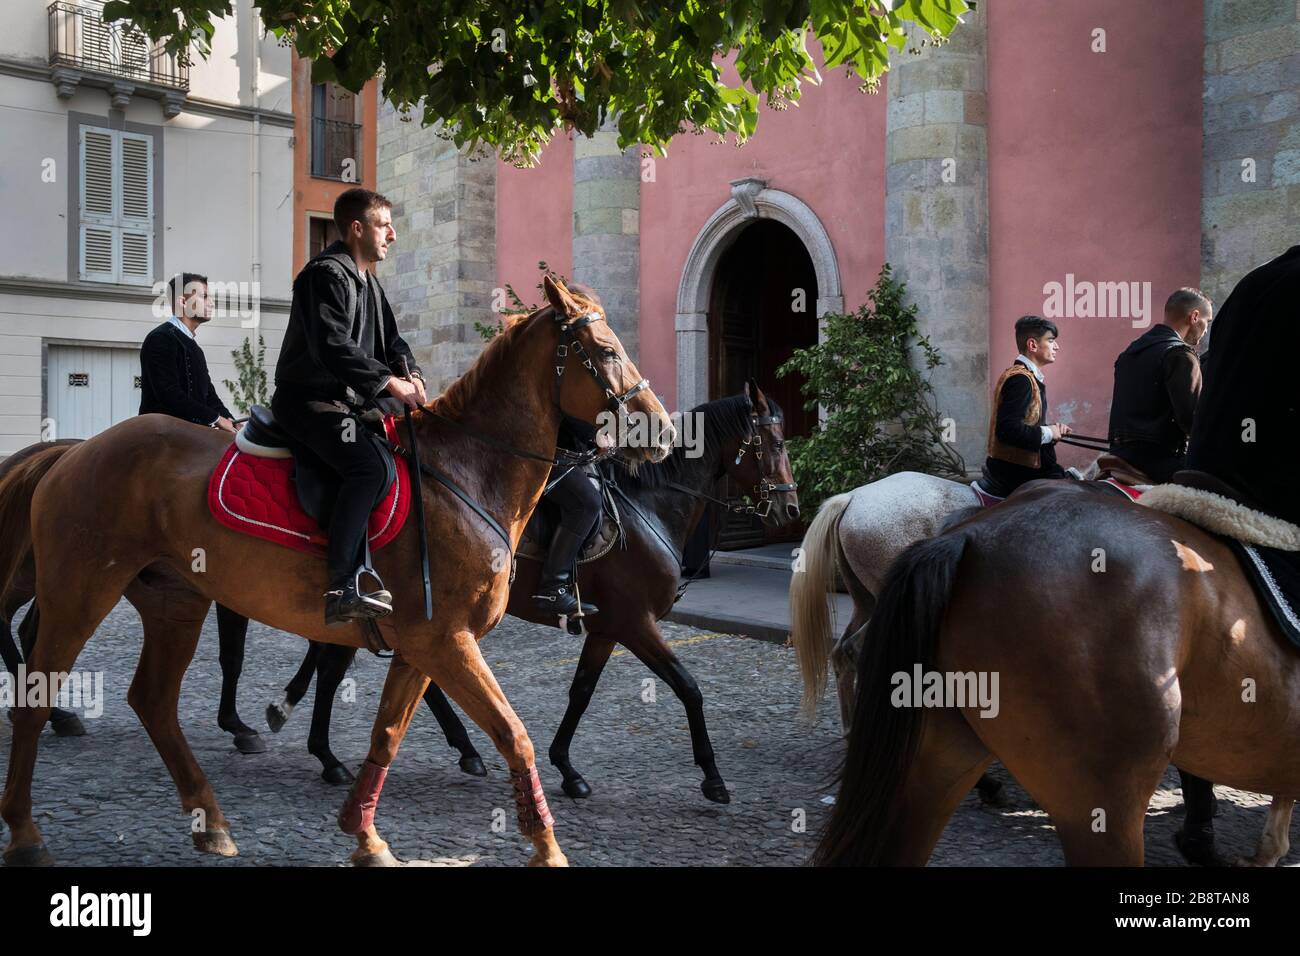 Every august small village celebrates a traditional and religious meaning horse races in its streets. Santu Lussurgiu, Sardinia (Italia, Italy) Stock Photo